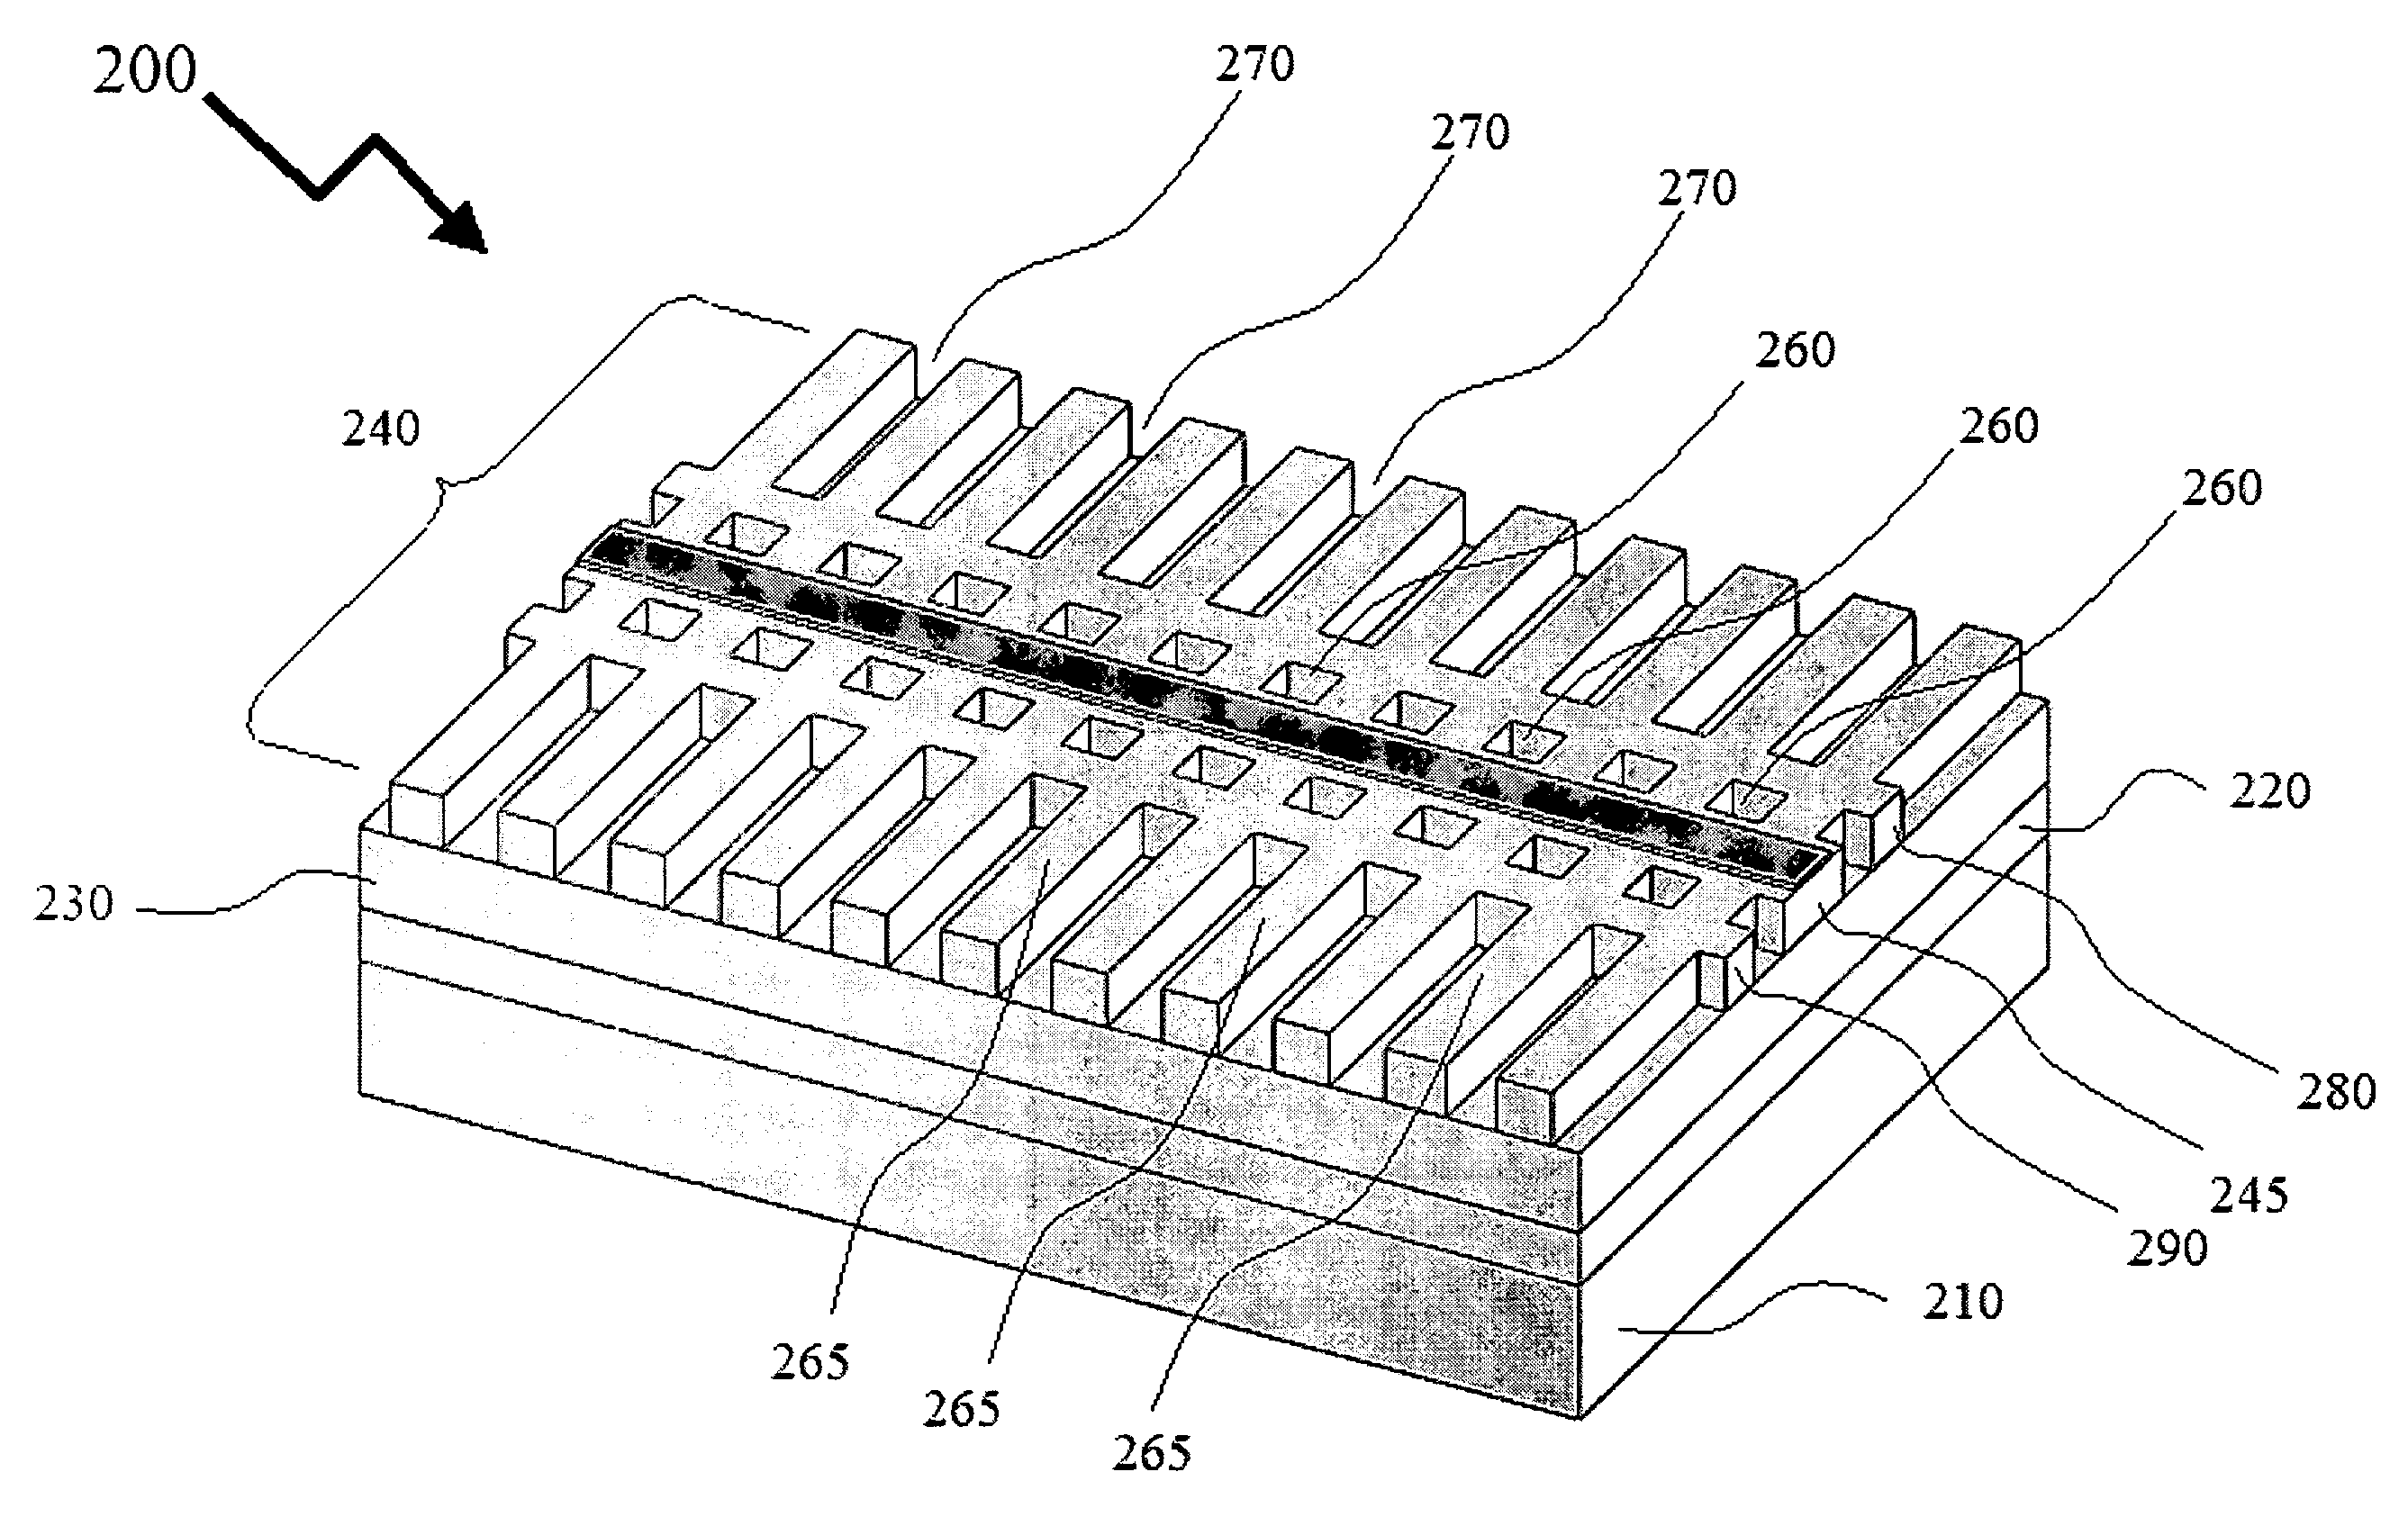 Coupling-enhanced surface etched gratings